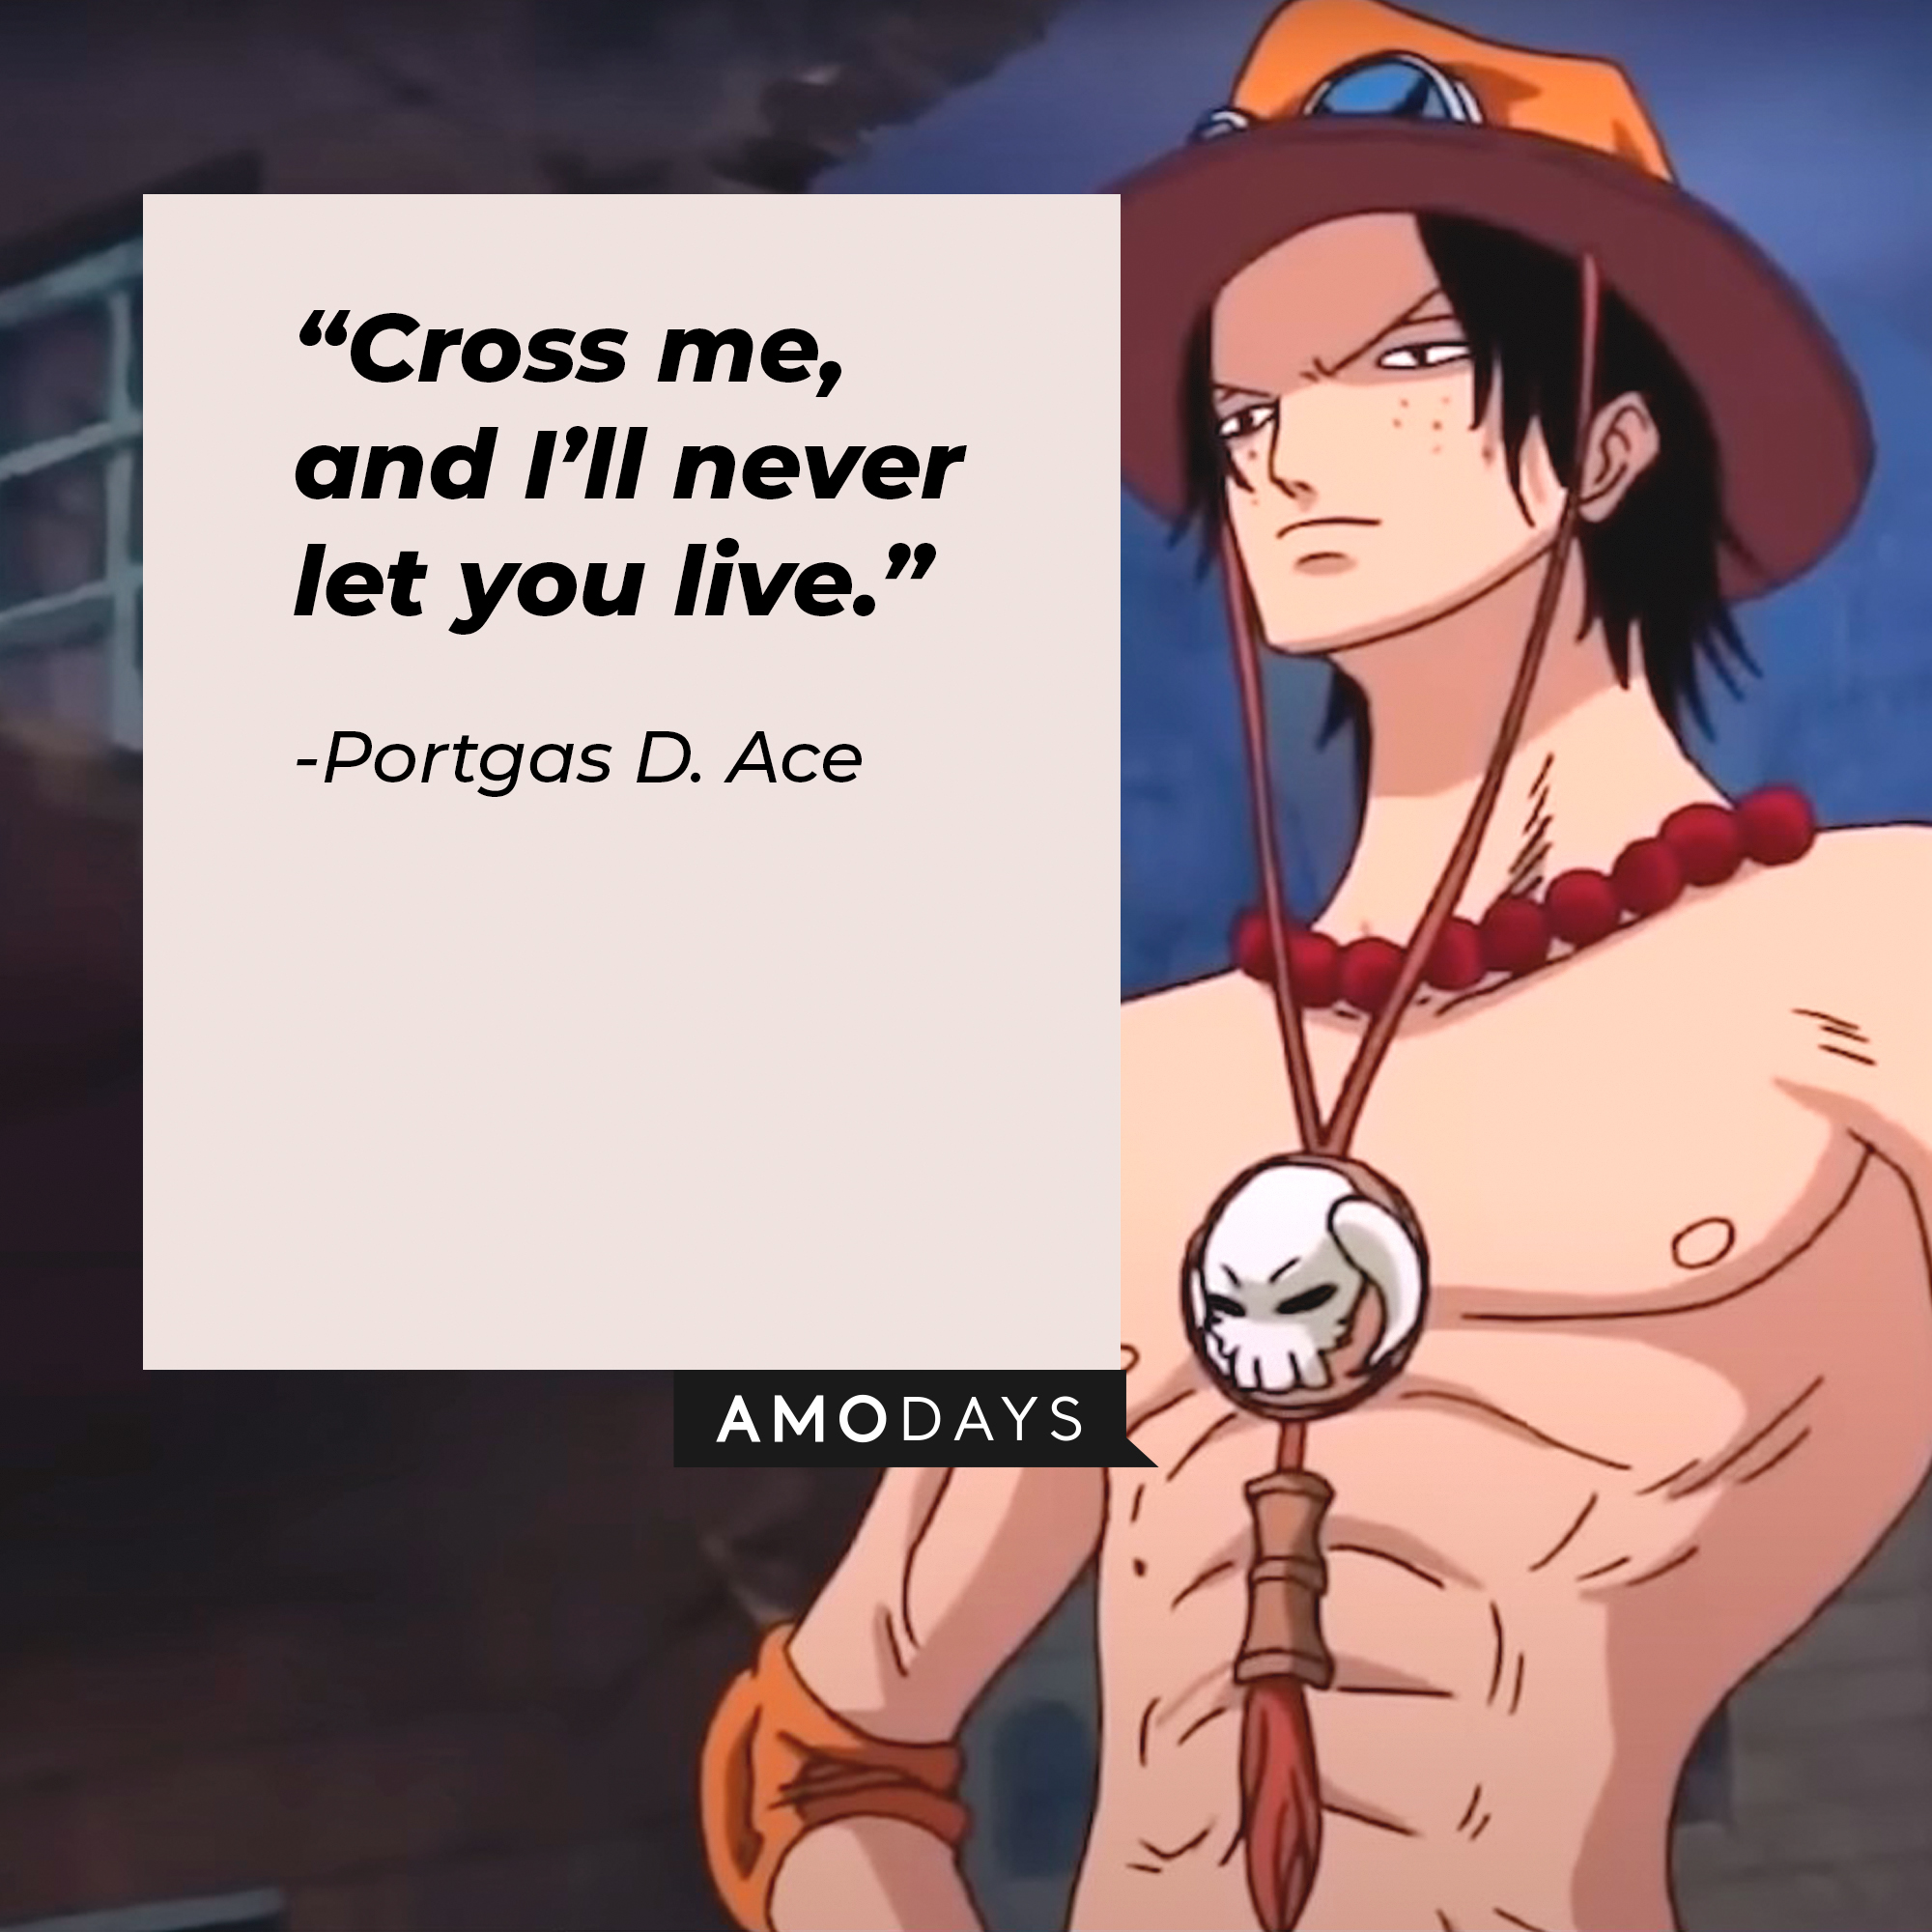 A picture of Portgas D. Ace’s with a quote by him: “Cross me, and I’ll never let you live.” | Source: facebook.com/onepieceofficial